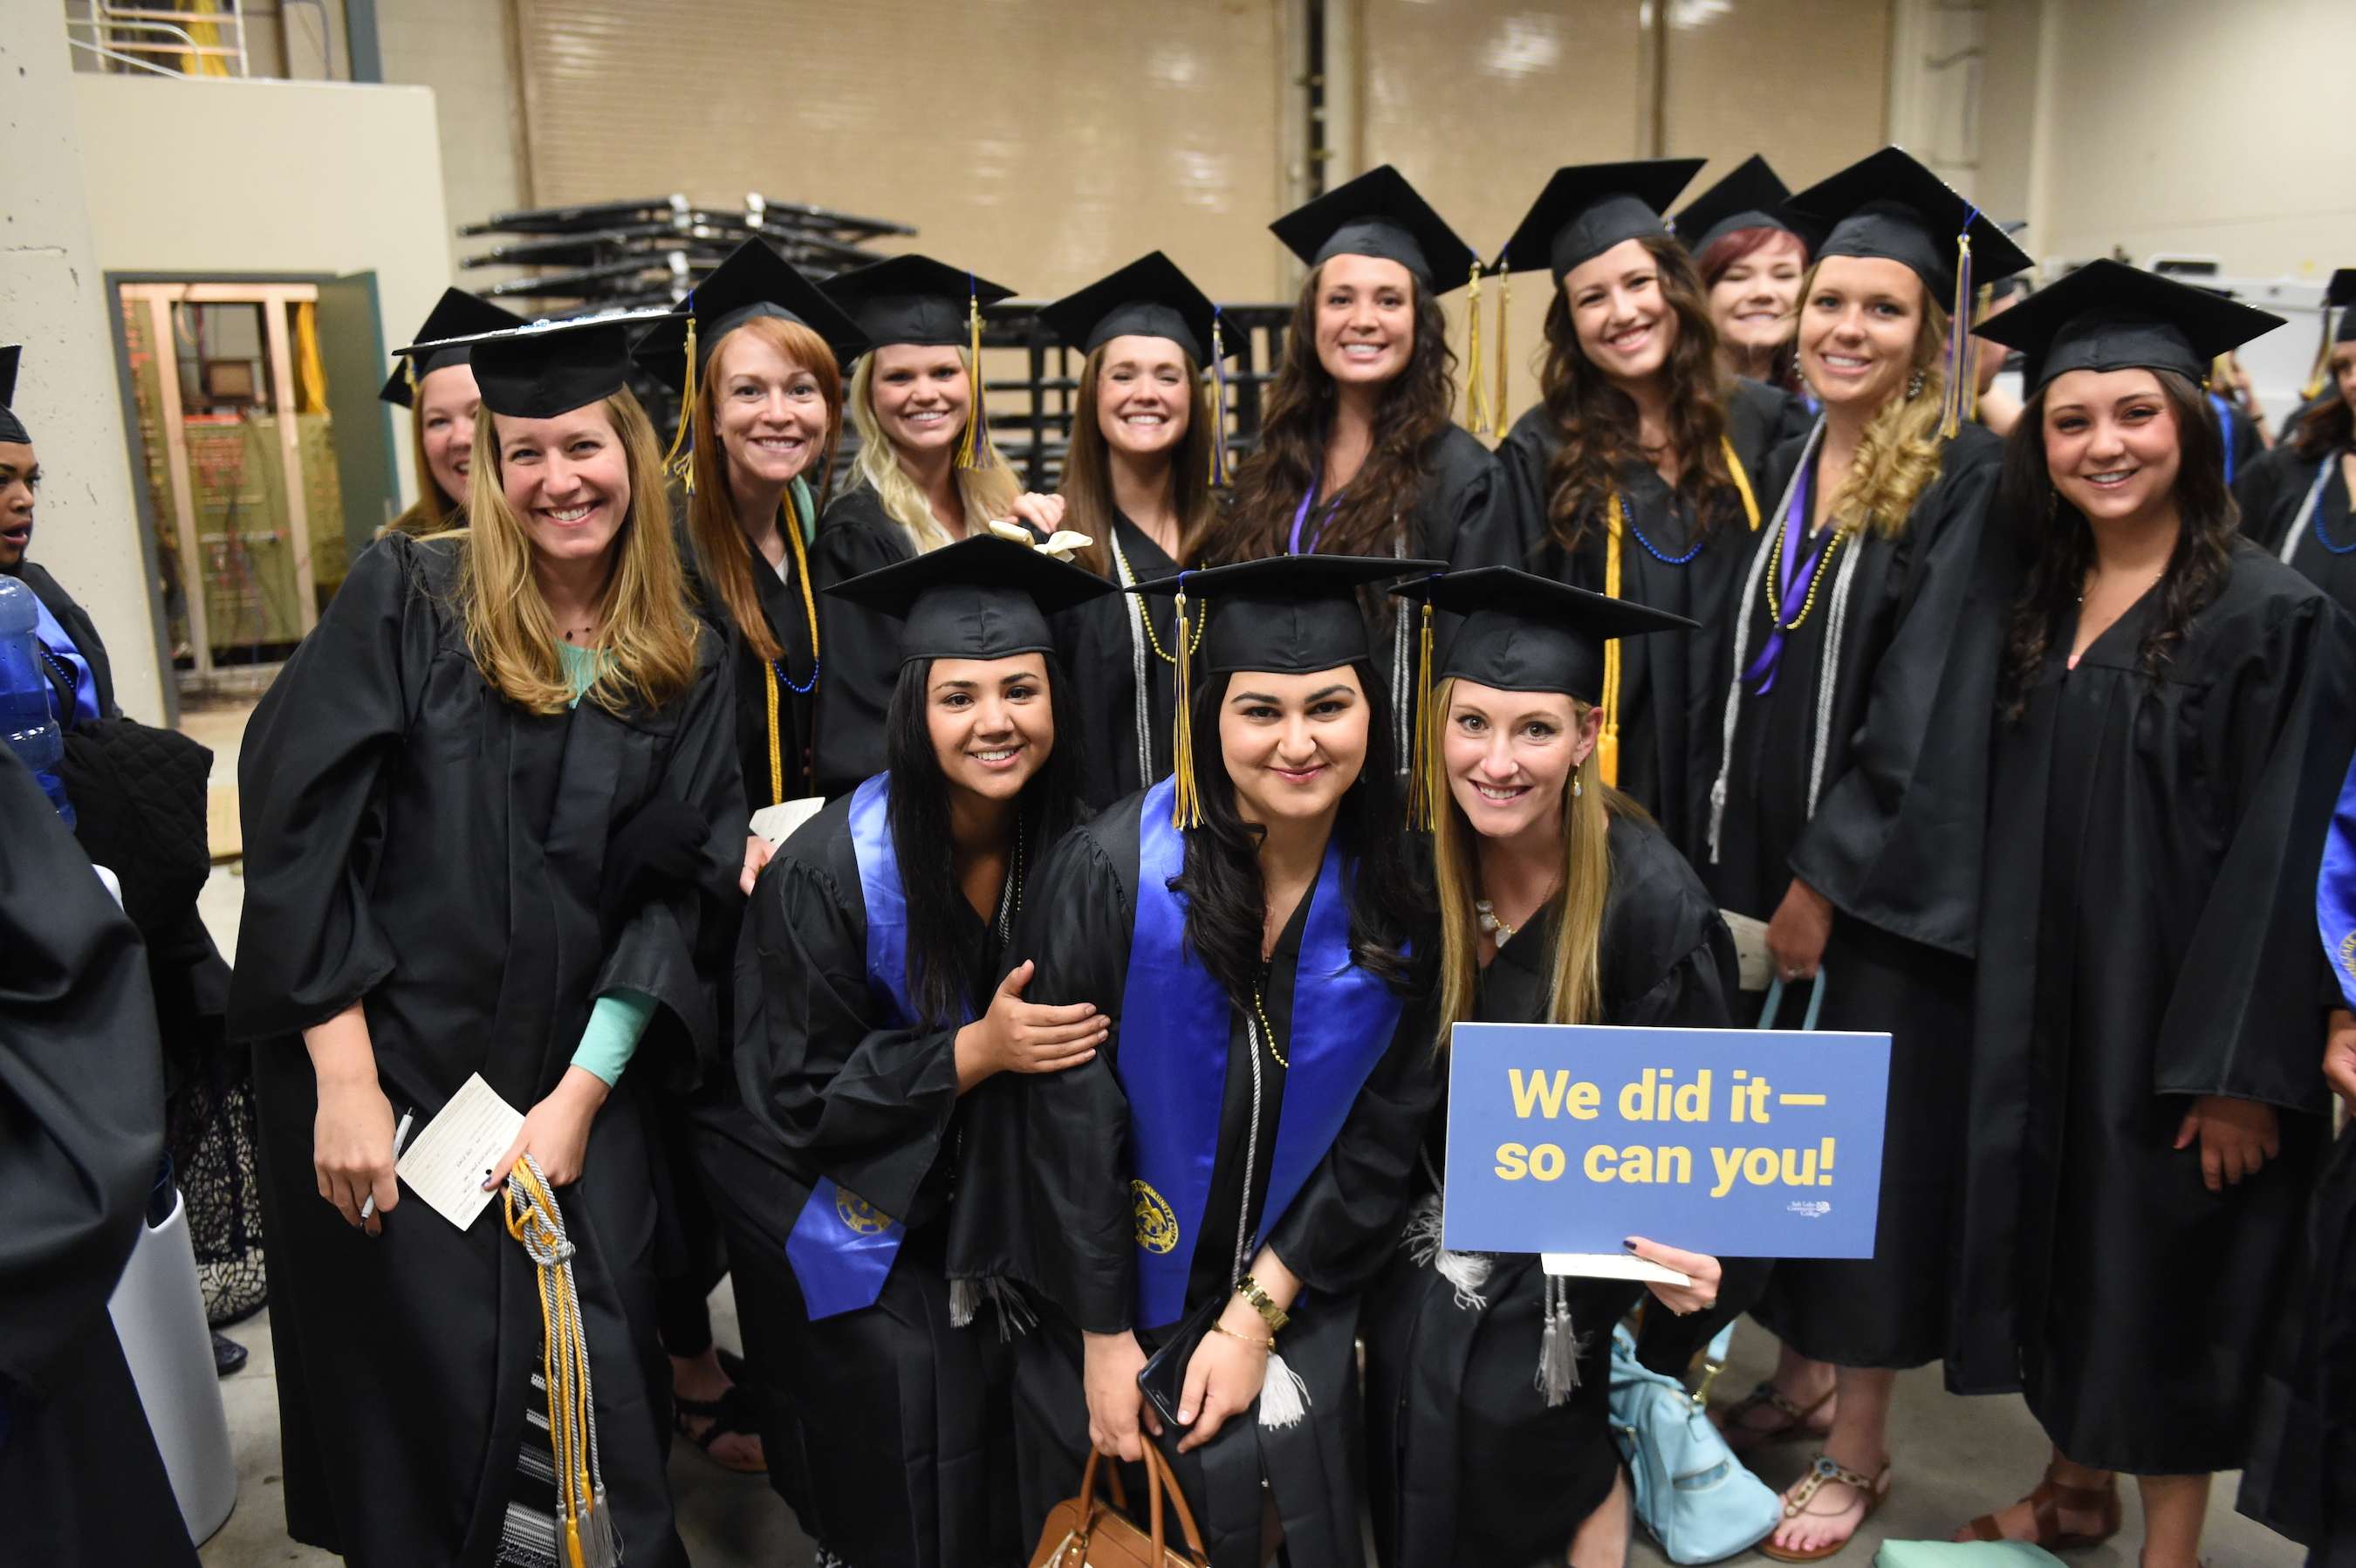 Graduates pause for a photo before the commencement ceremony for Salt Lake Community College.